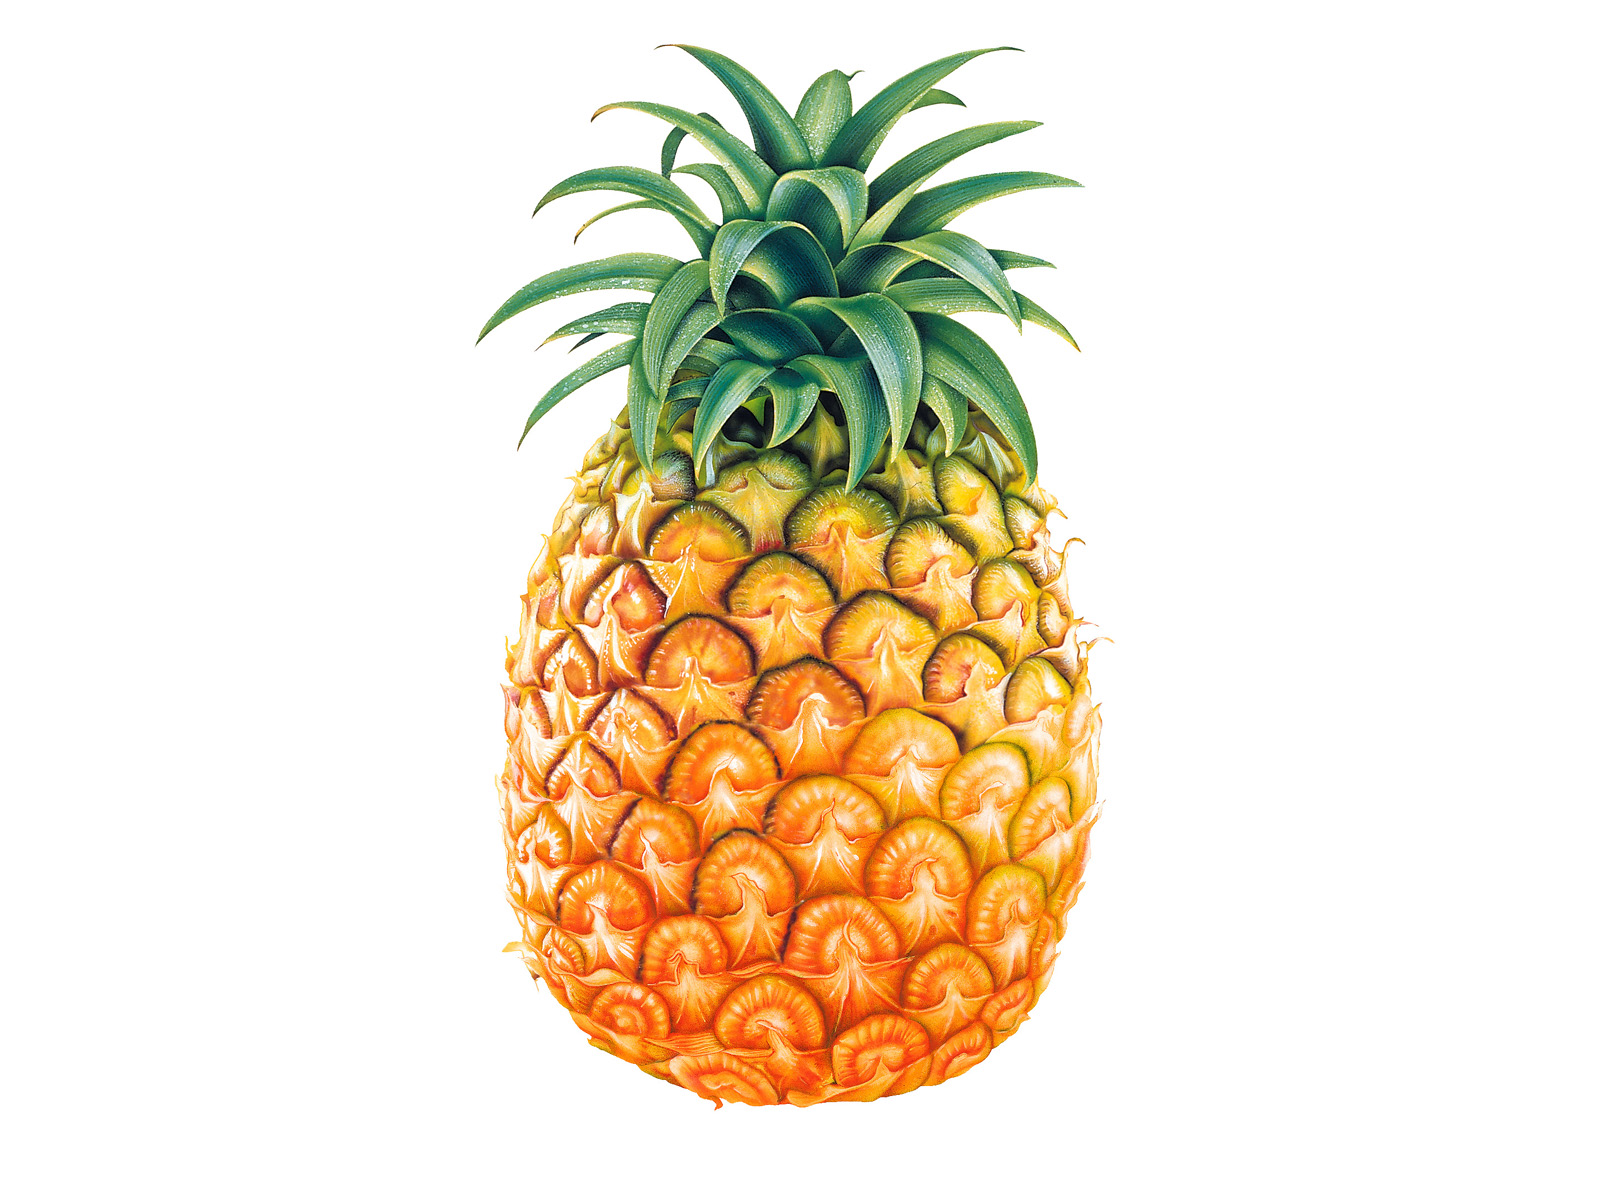 The Pineapple Is An International Symbol Of Warmth And Wele